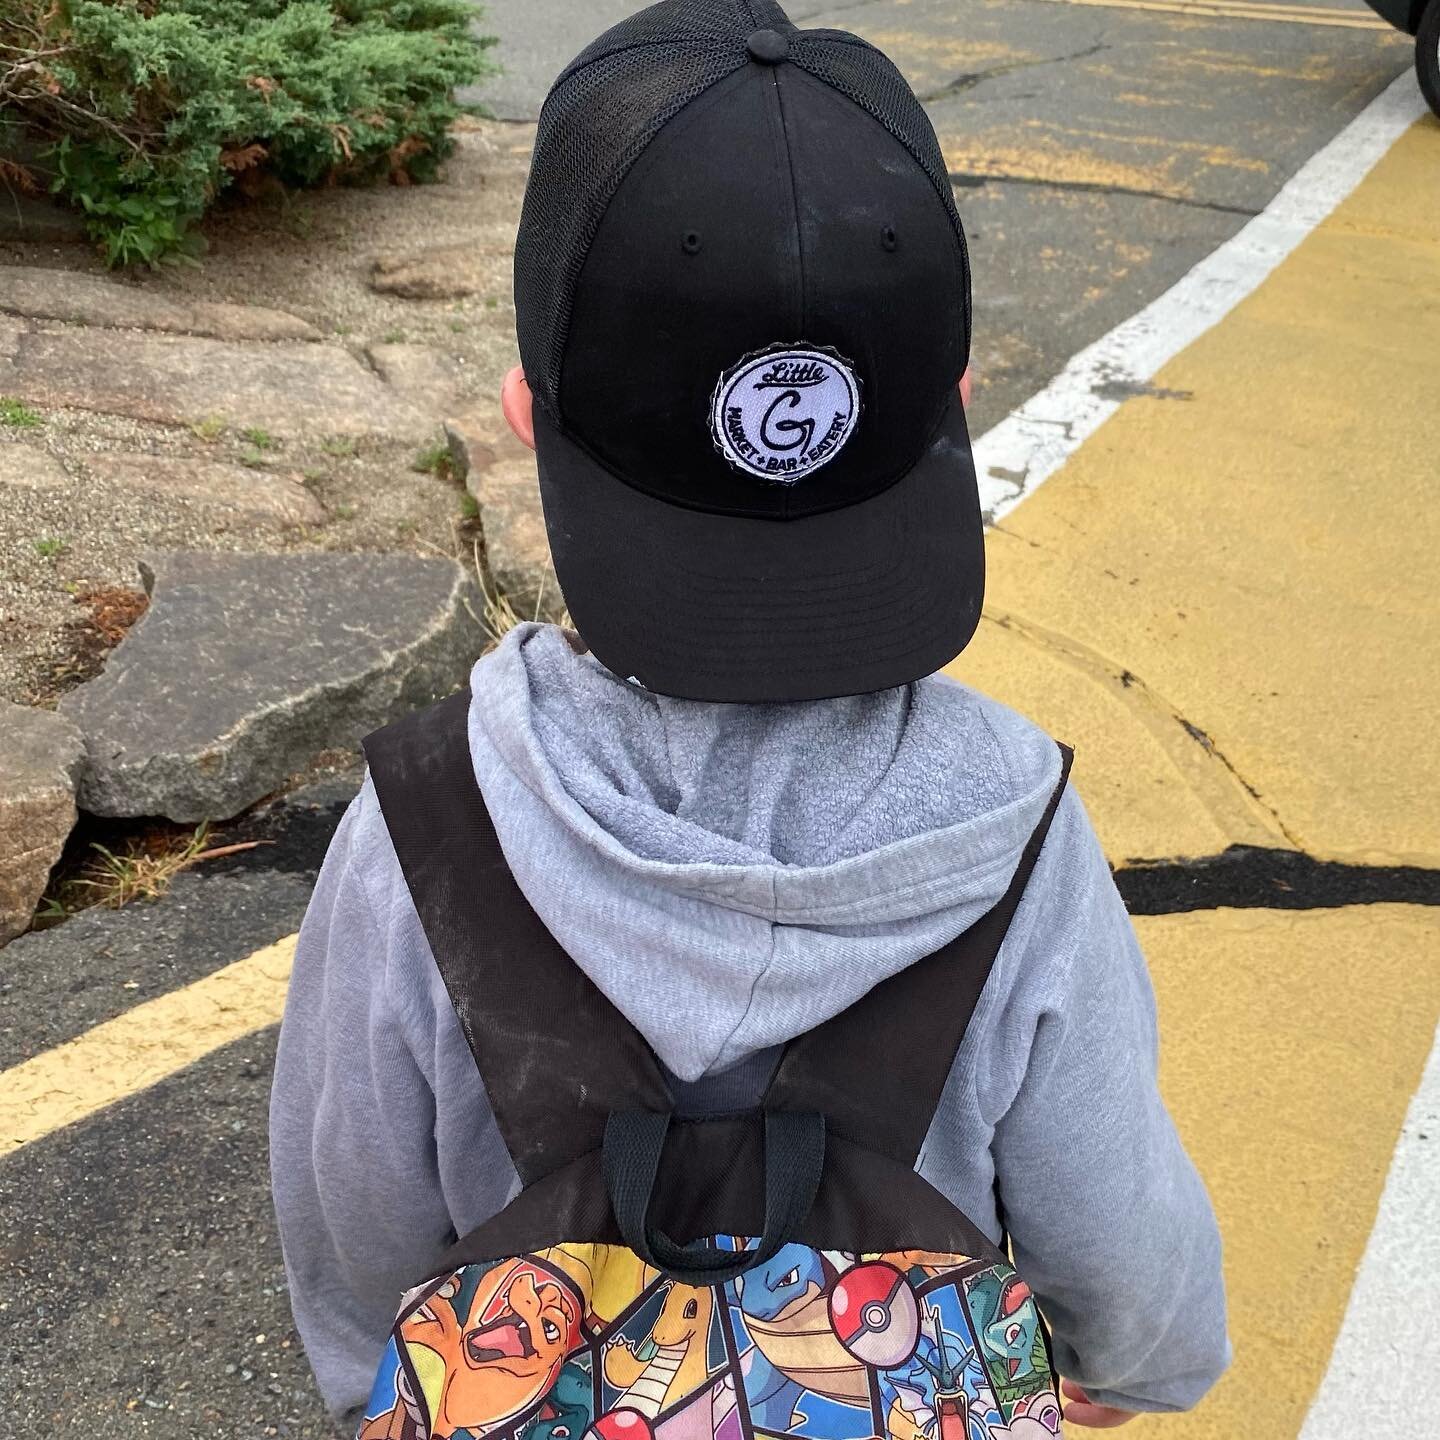 🤩𝐓𝐞𝐝𝐝𝐲 heading off to camp @jcc_ns with his 𝐅𝐀𝐕 ❤️ restaurant @littlegeatery trucker hat this morning! 
His Momma Jackie having a proud moment to share with us the ❤️and boy do we ❤️ her too!!! 

Teddy &hellip;You wear it well my friend! 
❤️